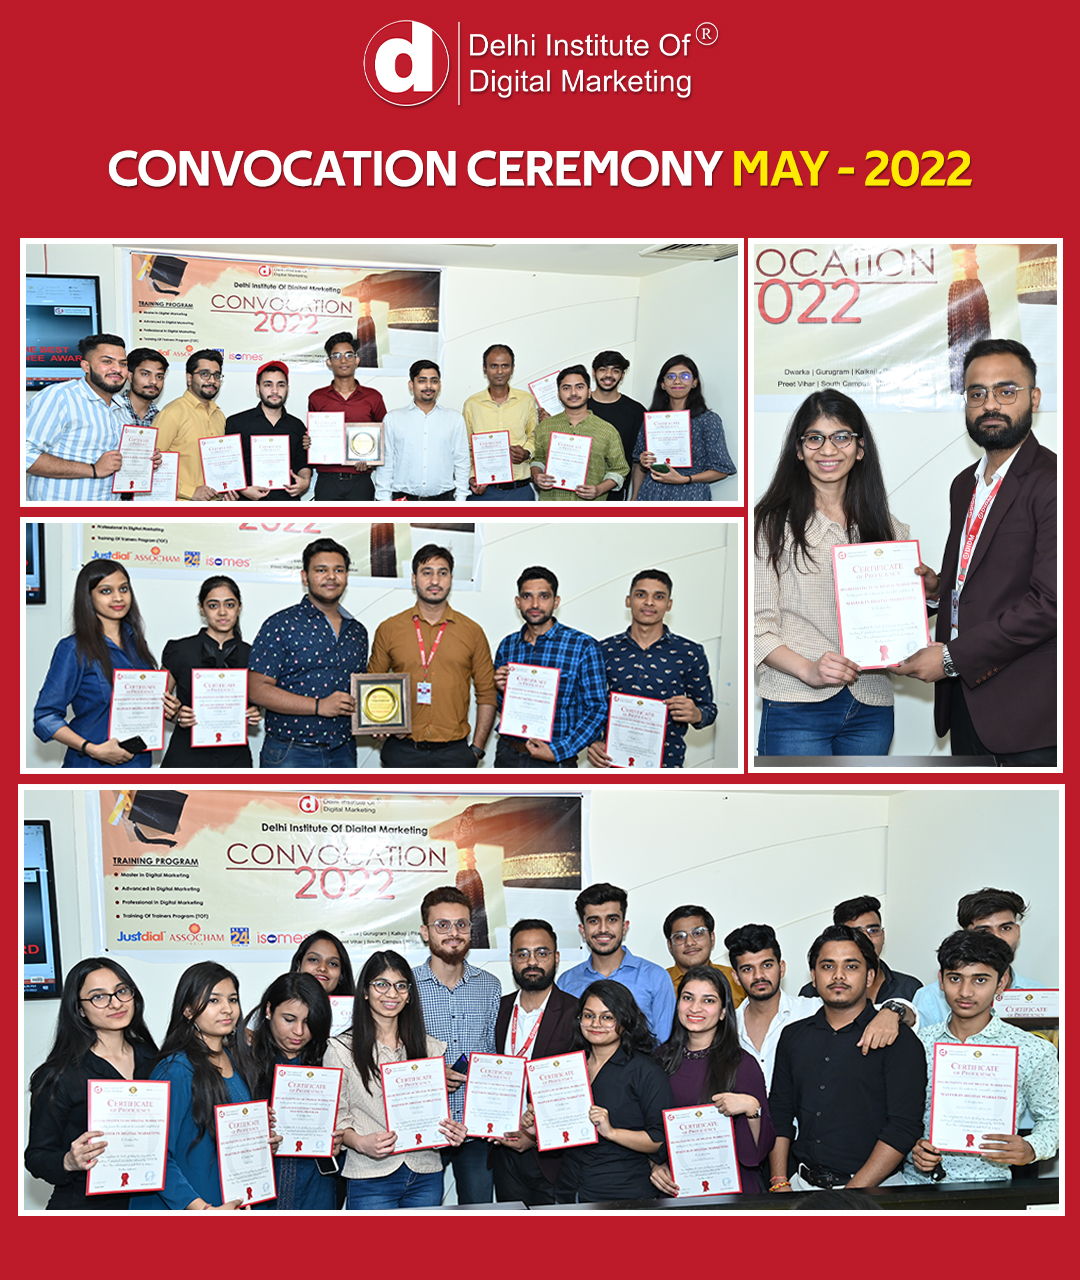 DIDM Convocation Ceremony May 2022